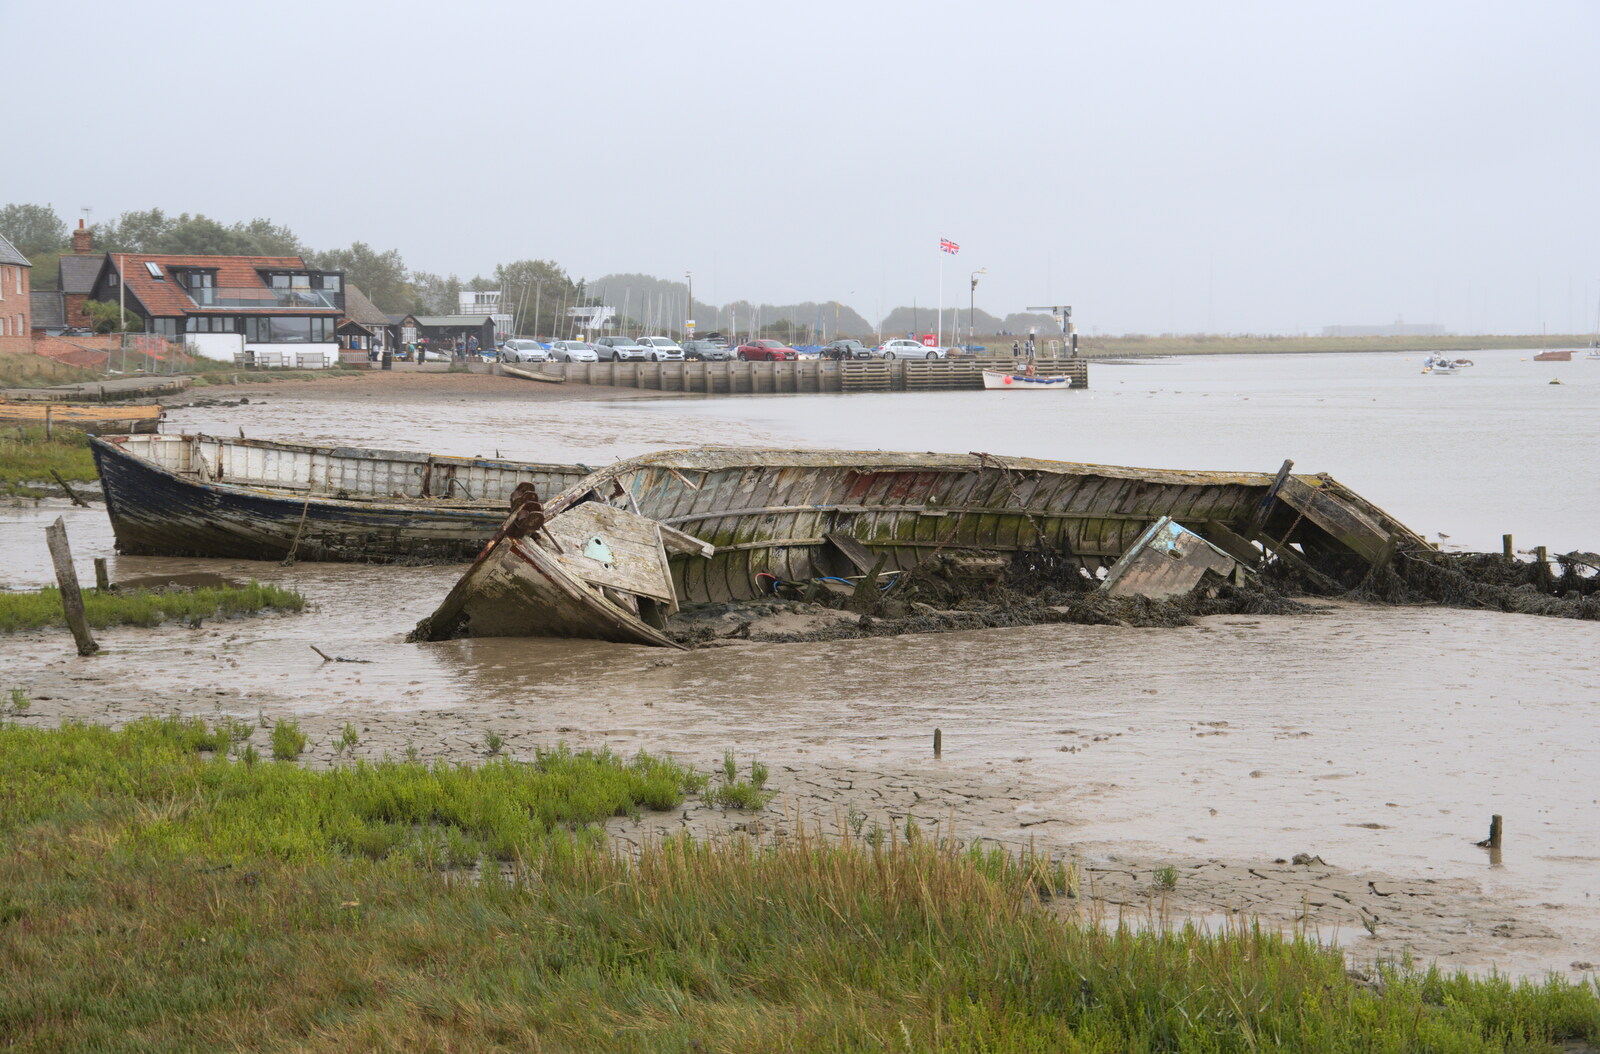 Skeletons of old boats from A Trip to Orford, Suffolk - 29th August 2020